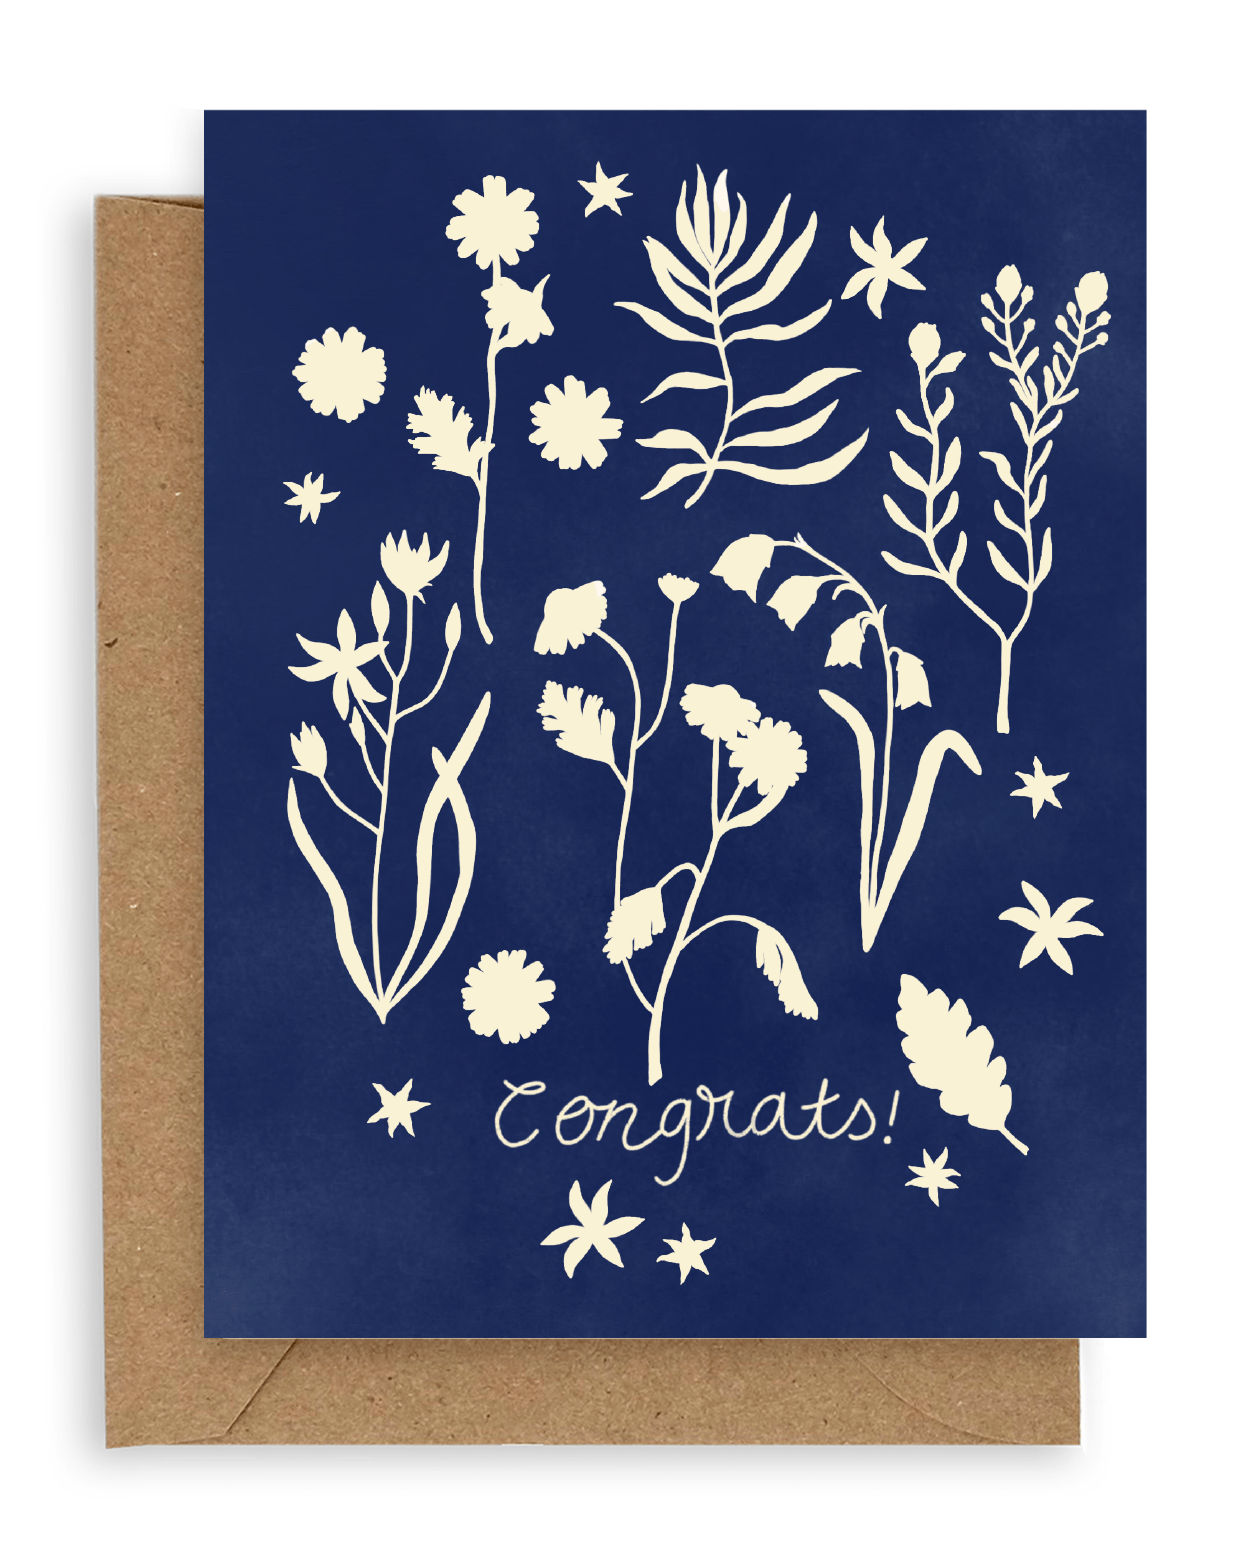 White-out forest flowers arranged around the word &quot;congrats!&quot; printed on a navy blue background. Shown with kraft envelope.